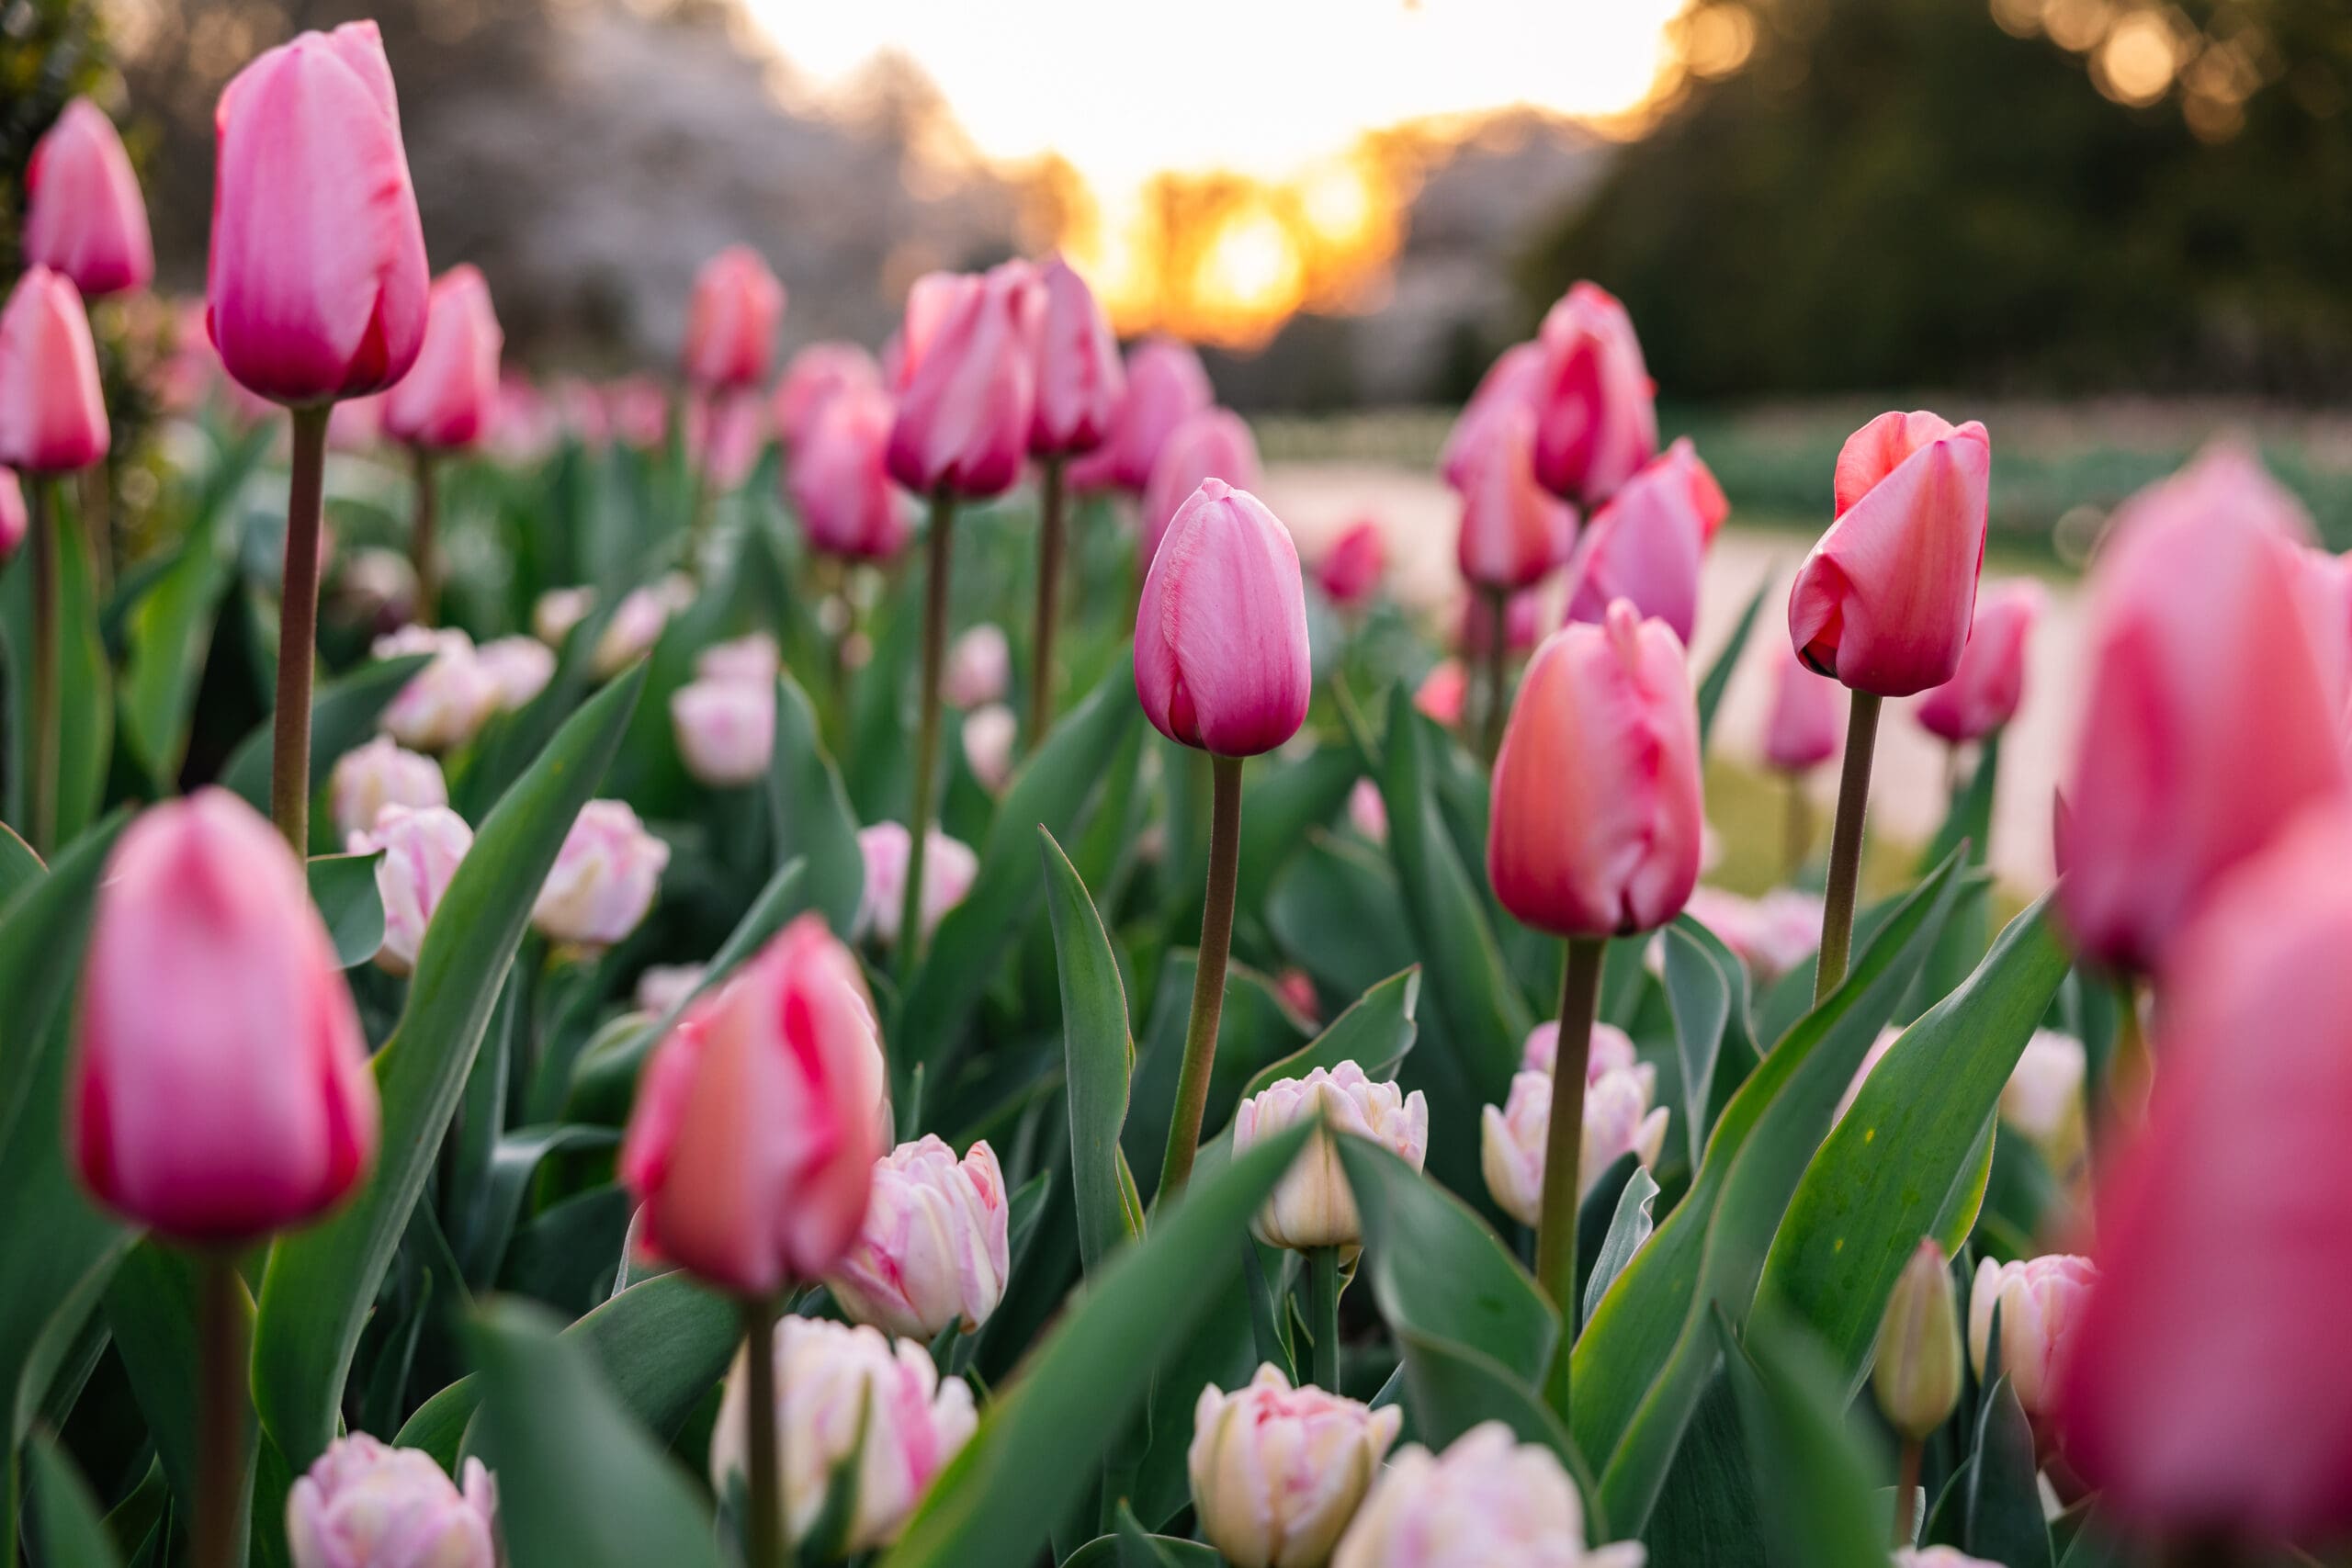 Featured image for “Longwood’s tulips will hit peak bloom through this week”